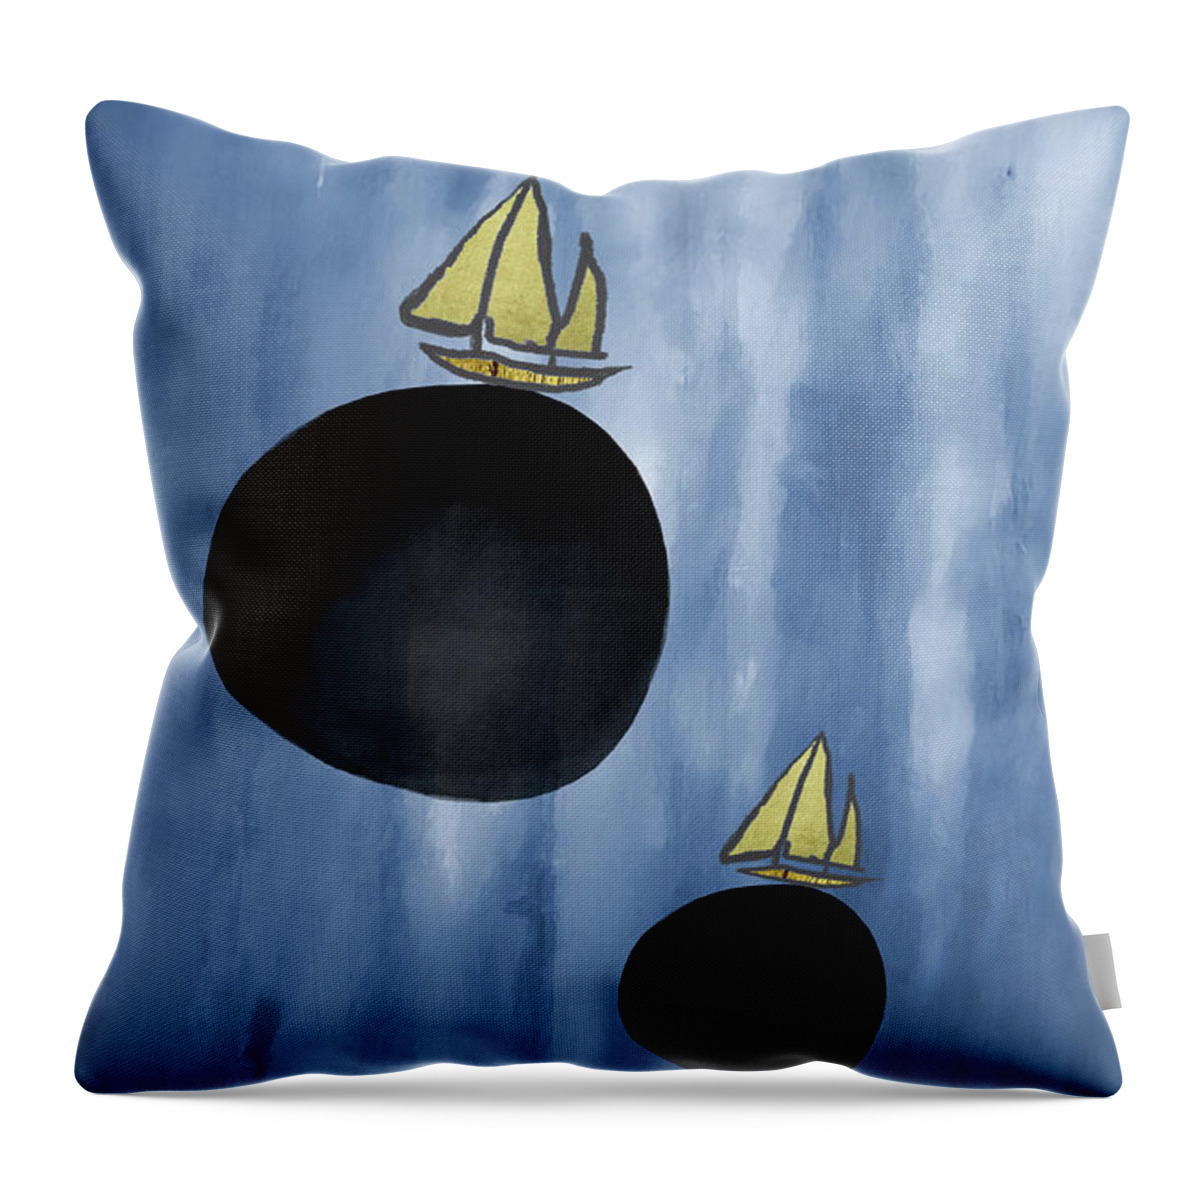 Sailing Your Dreams Throw Pillow featuring the painting Sailing Your Dreams by Kandy Hurley